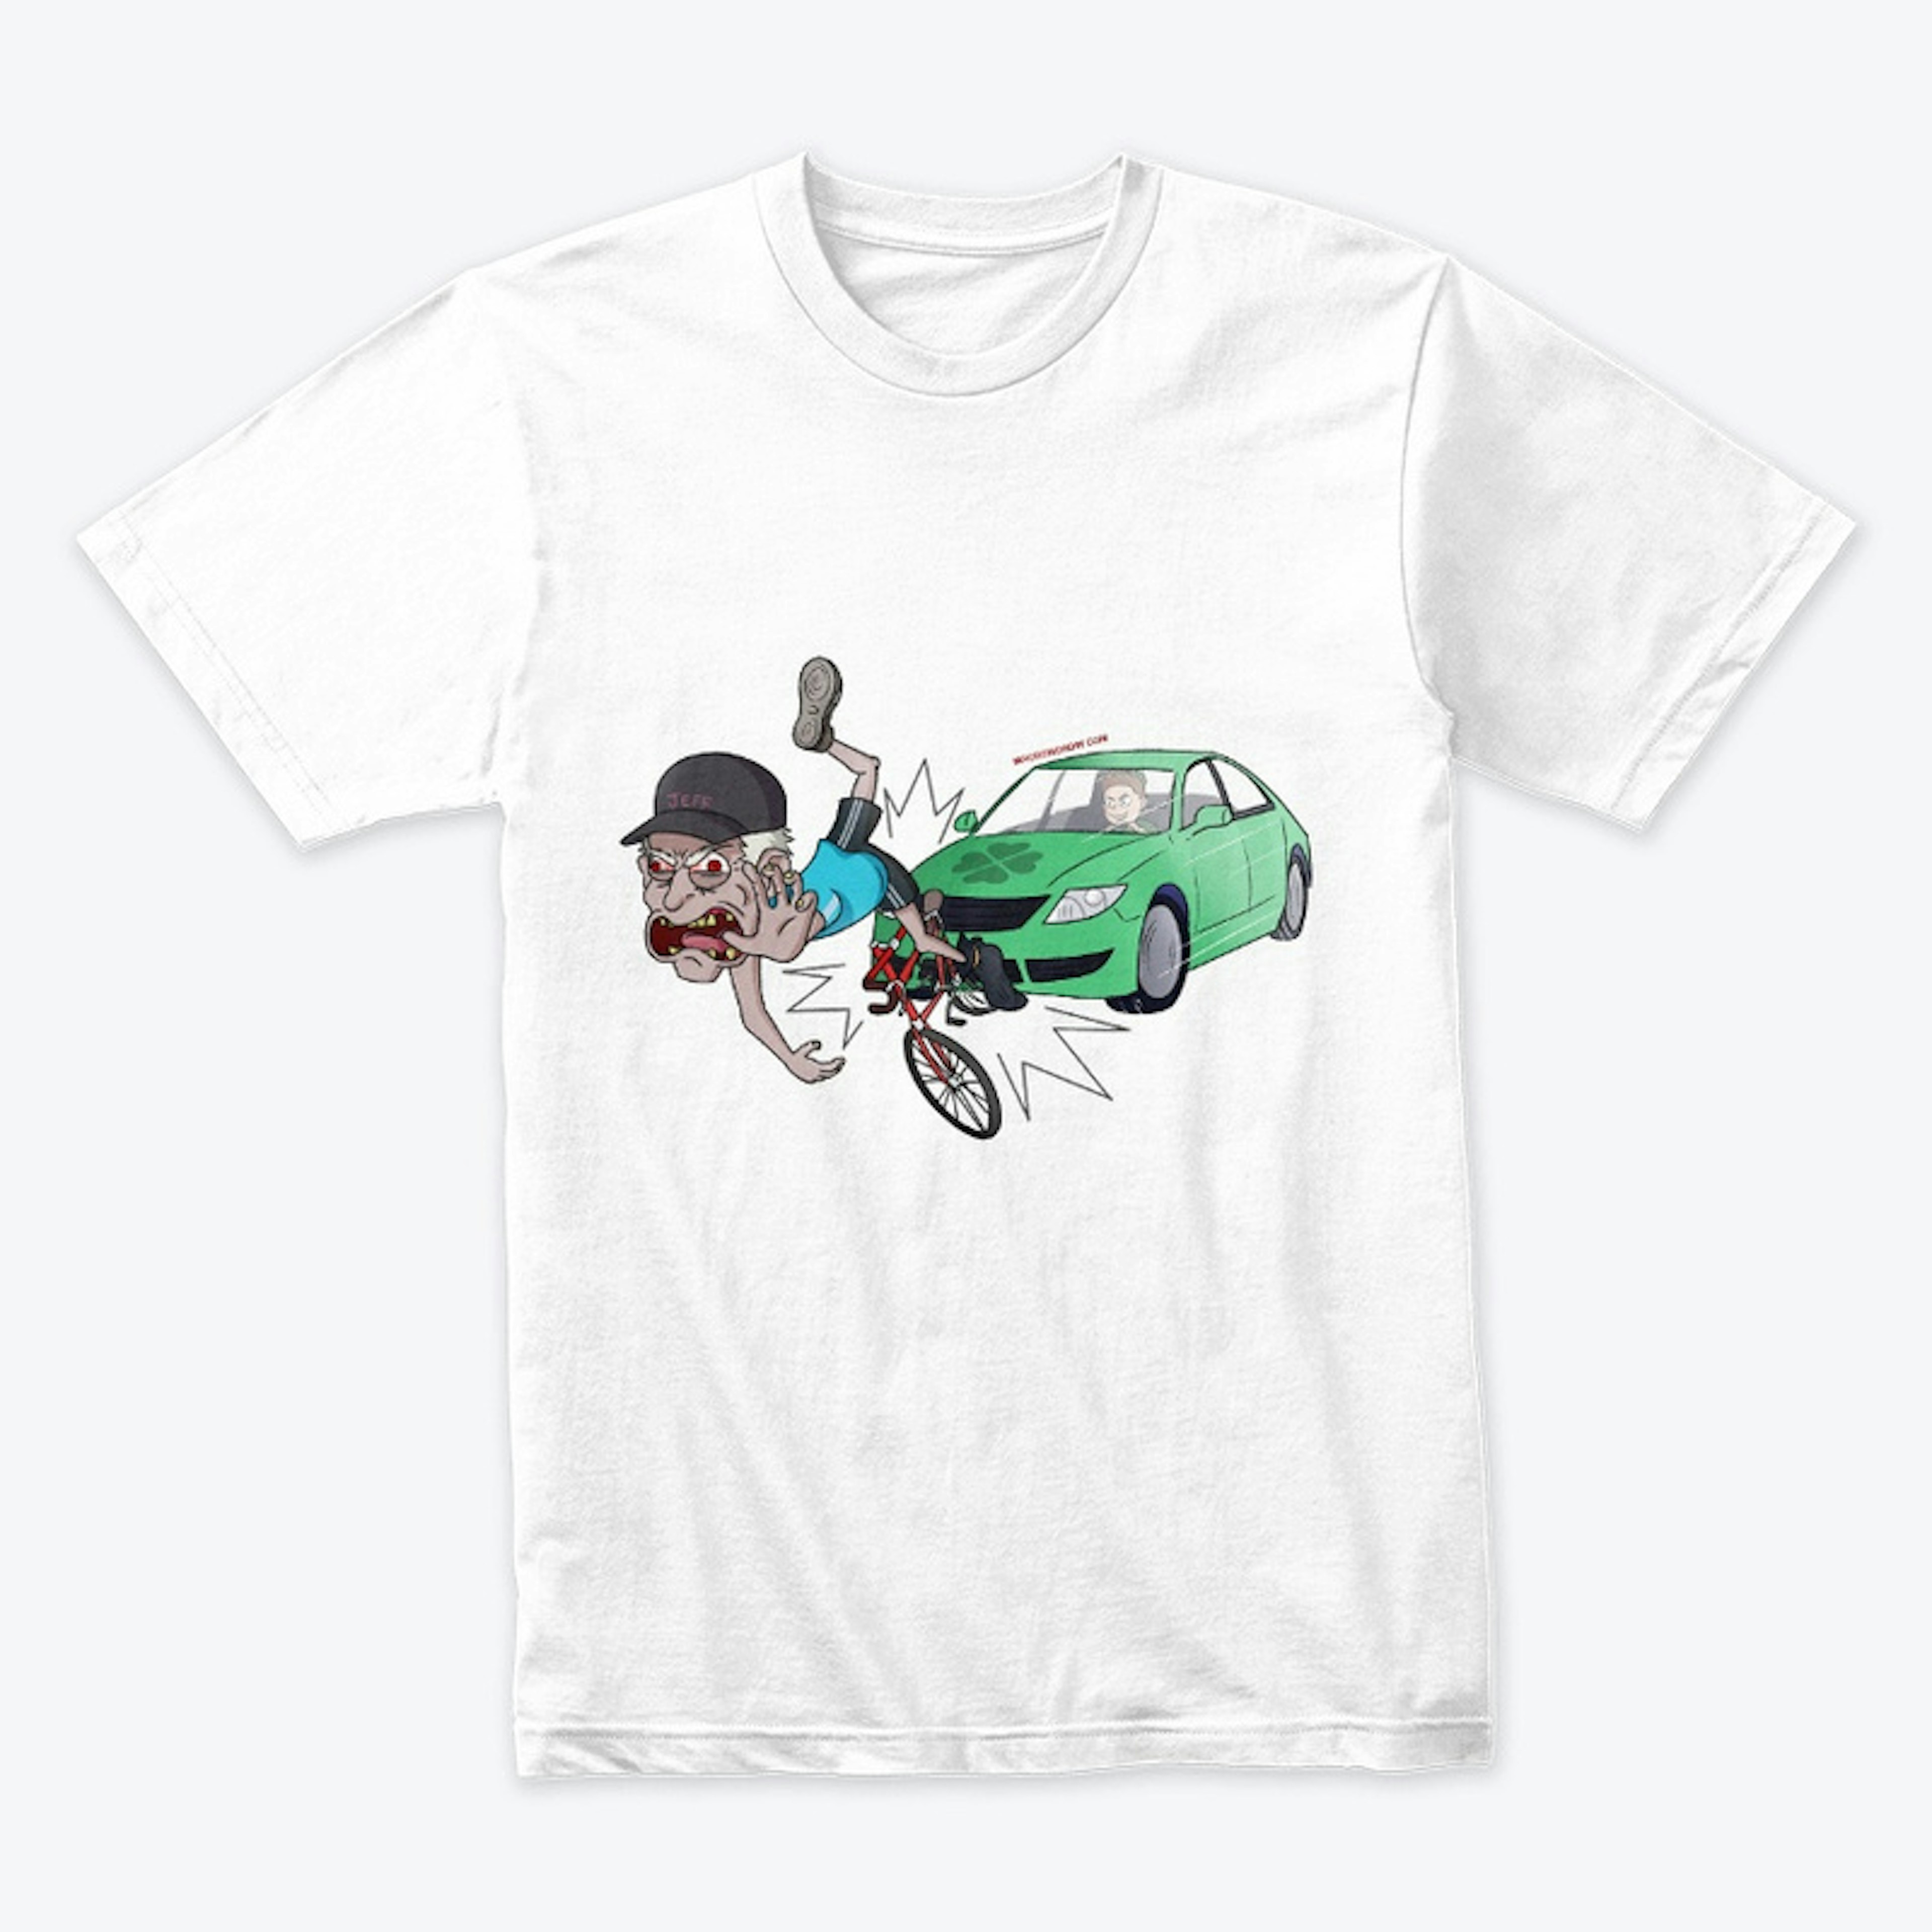 Jeff Gets Hit By A Car T-Shirt